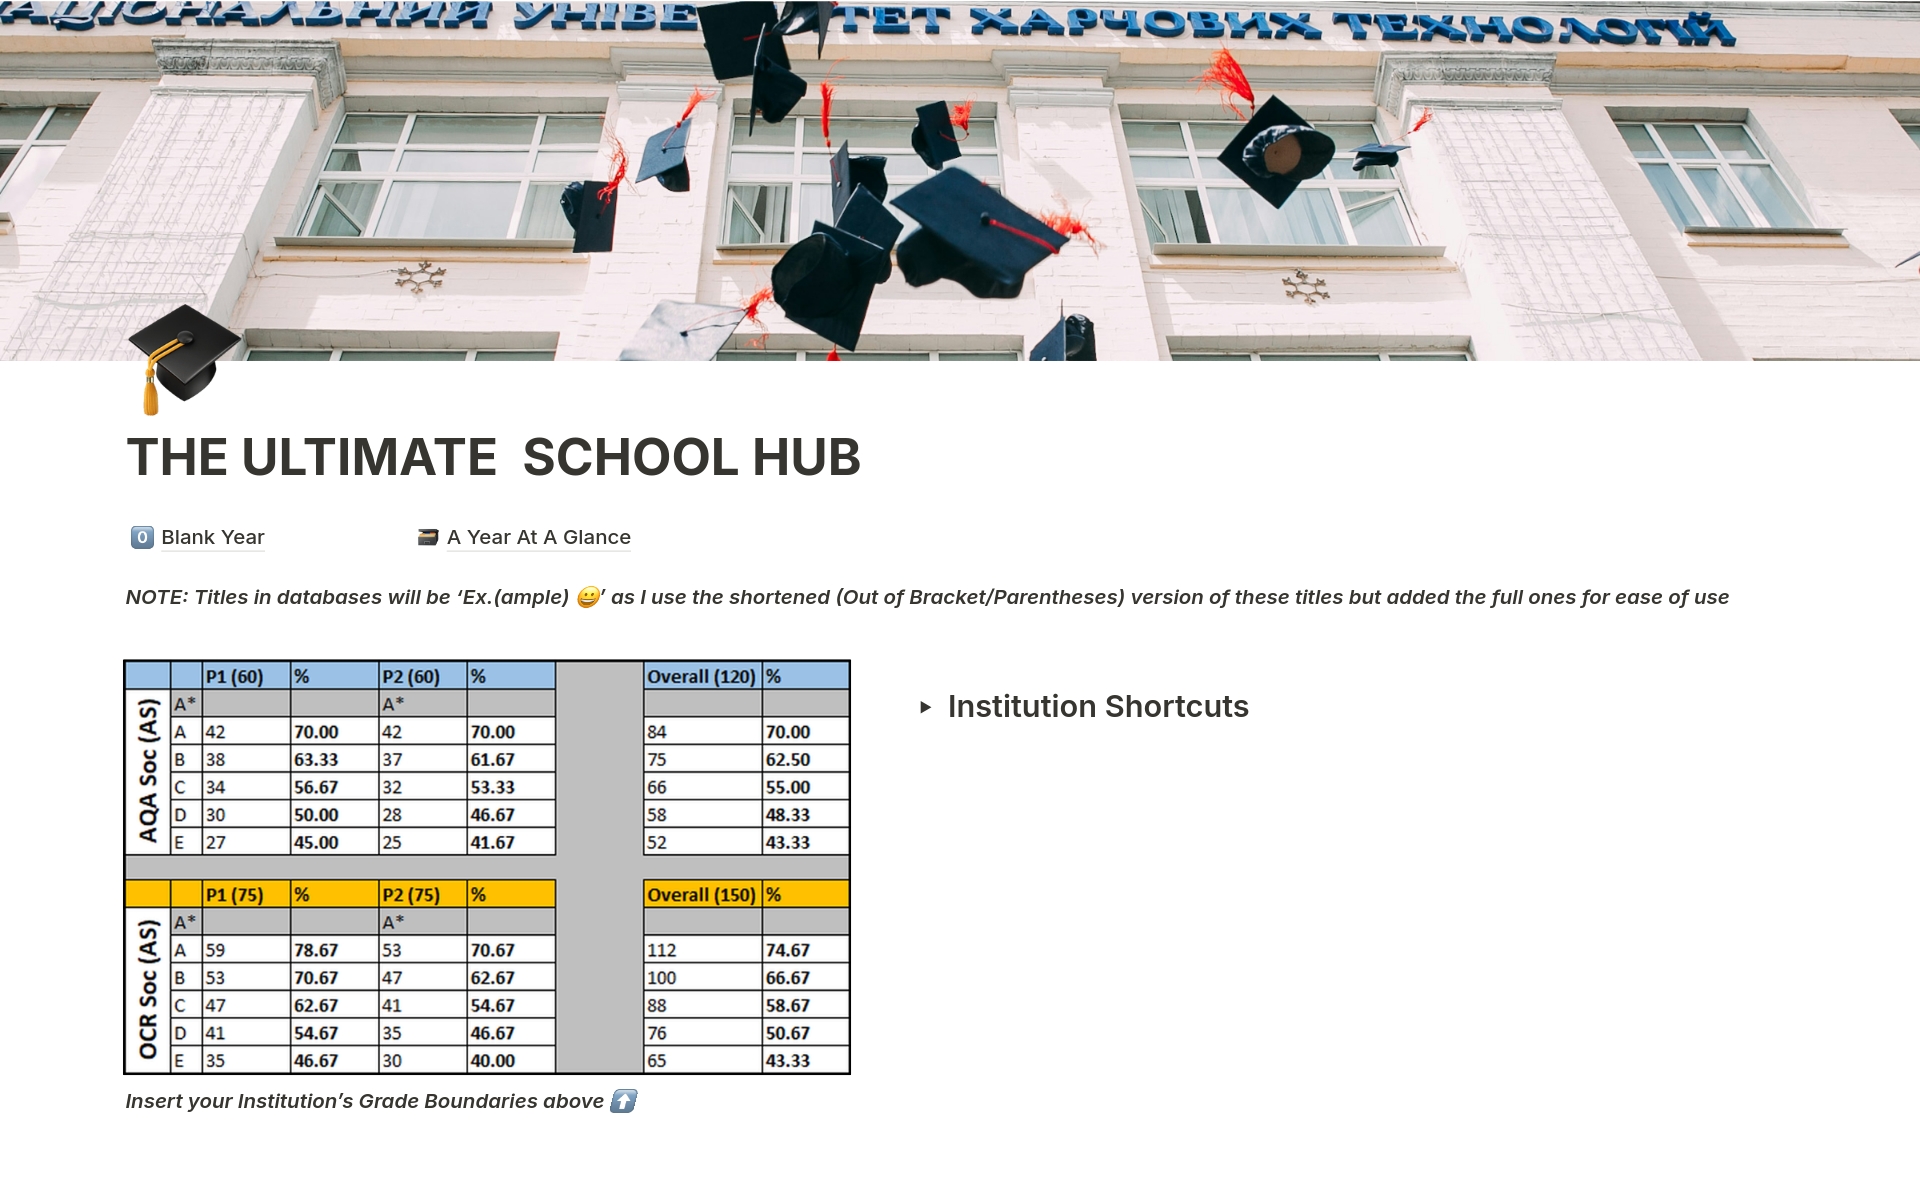 Do you not know where to start with Notion but want to use it for all of your schoolwork?
Well, The Ultimate School Hub can help you there! 